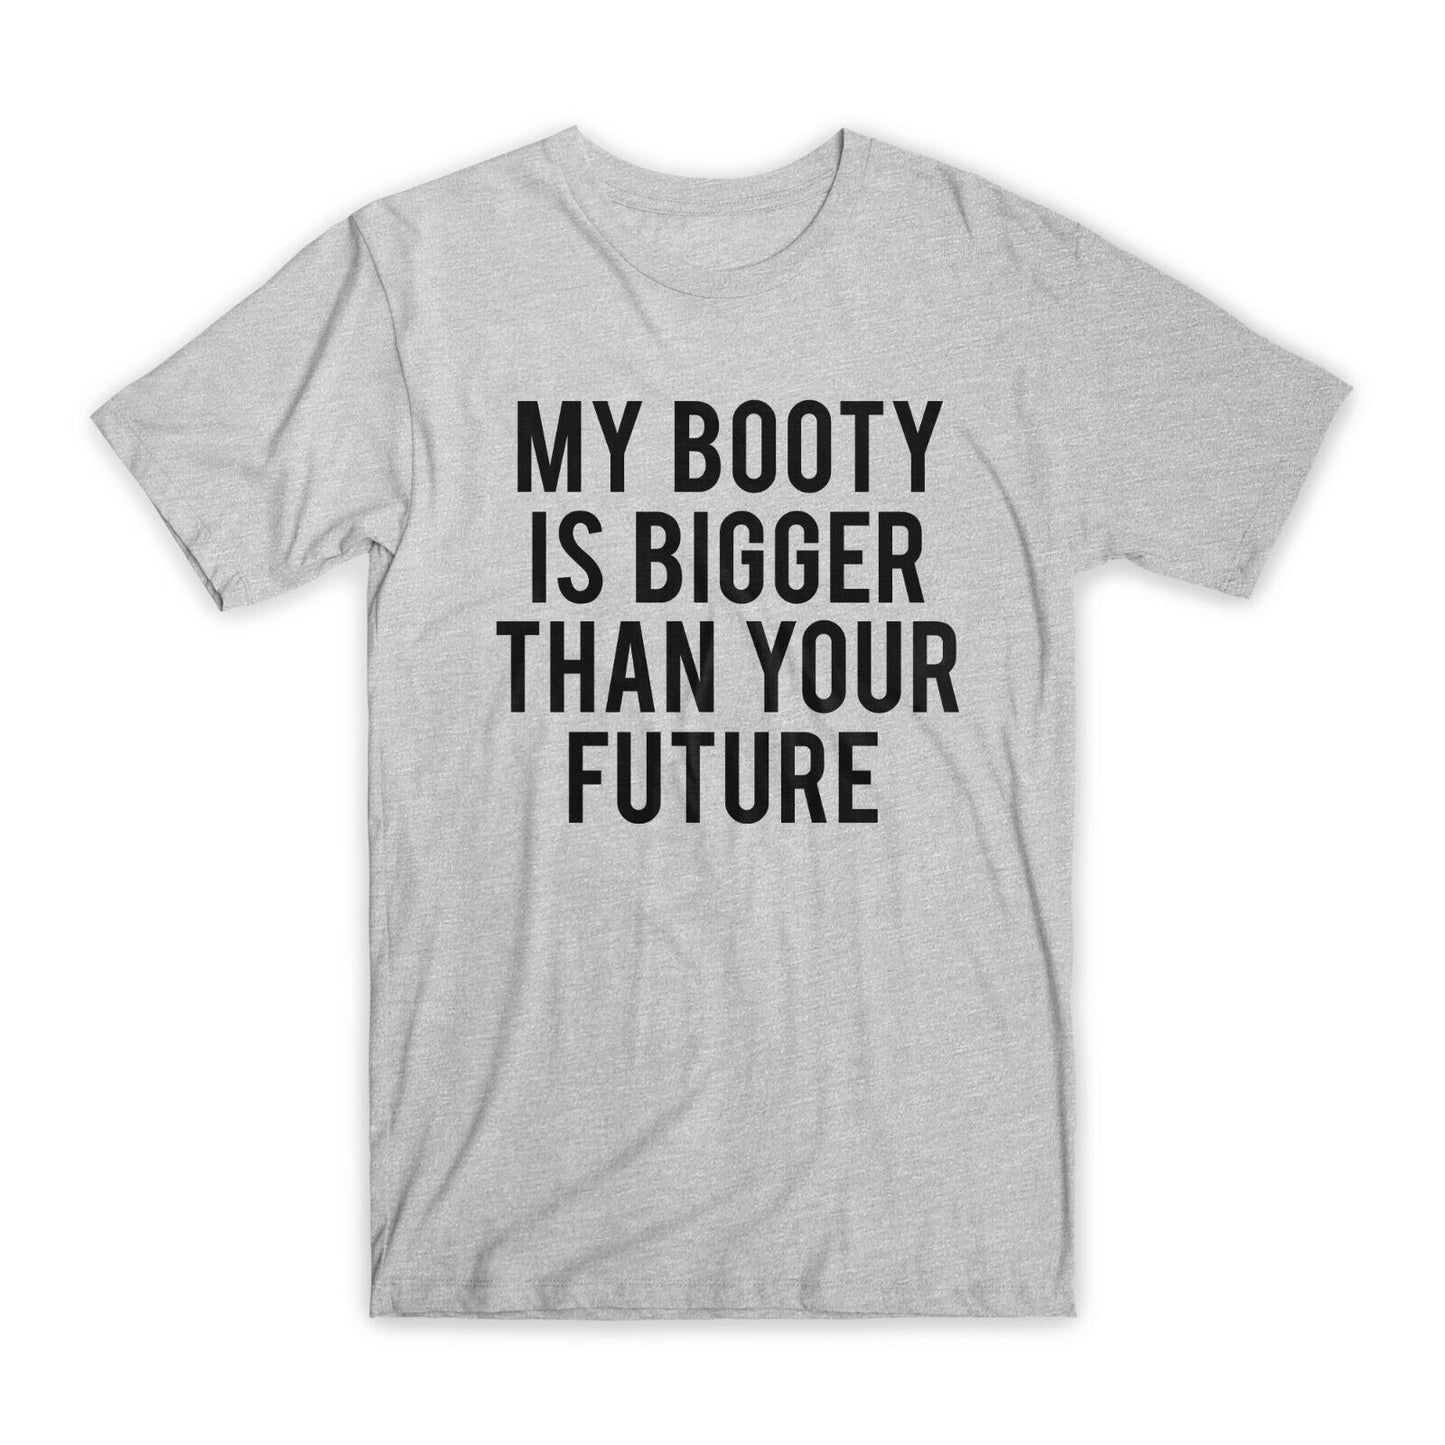 My Booty is Bigger Than Your Future T-Shirt Premium Soft Cotton Funny T Gift NEW